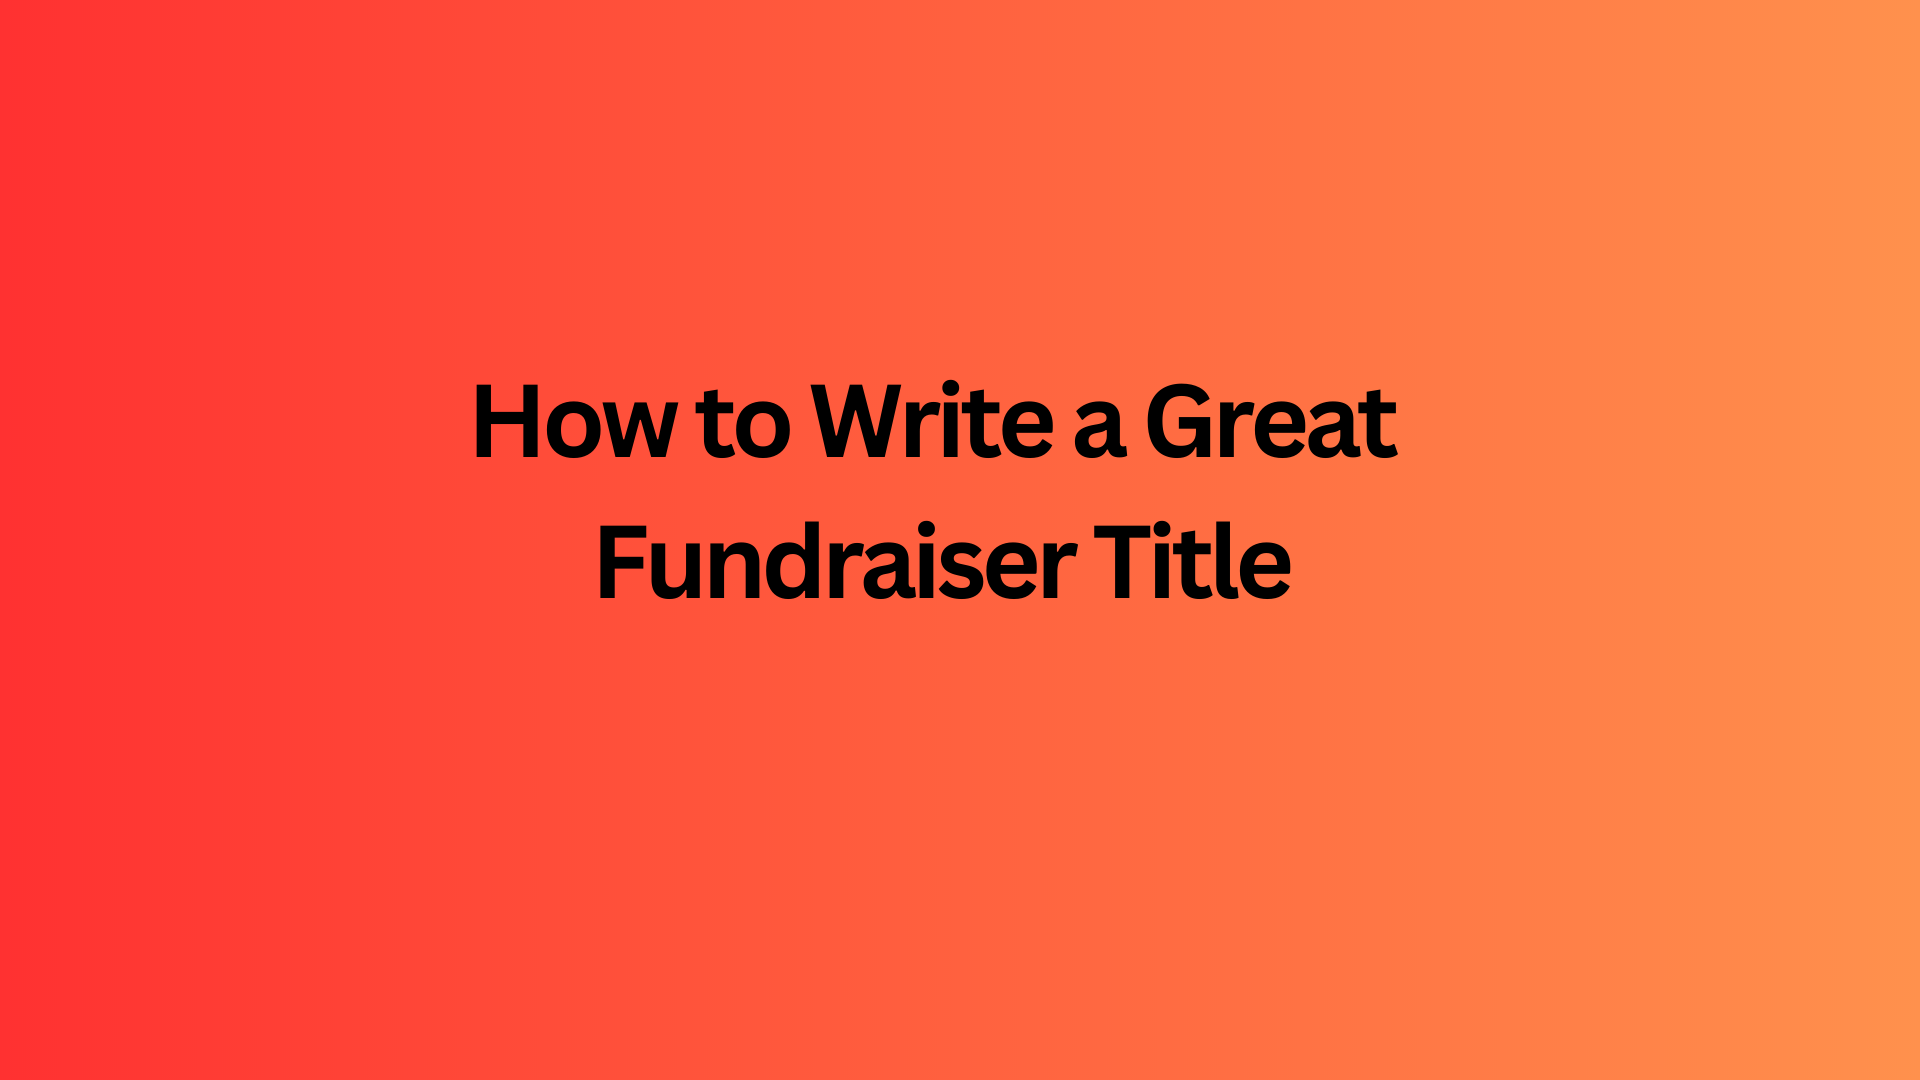 How to Write a Great Fundraiser Title